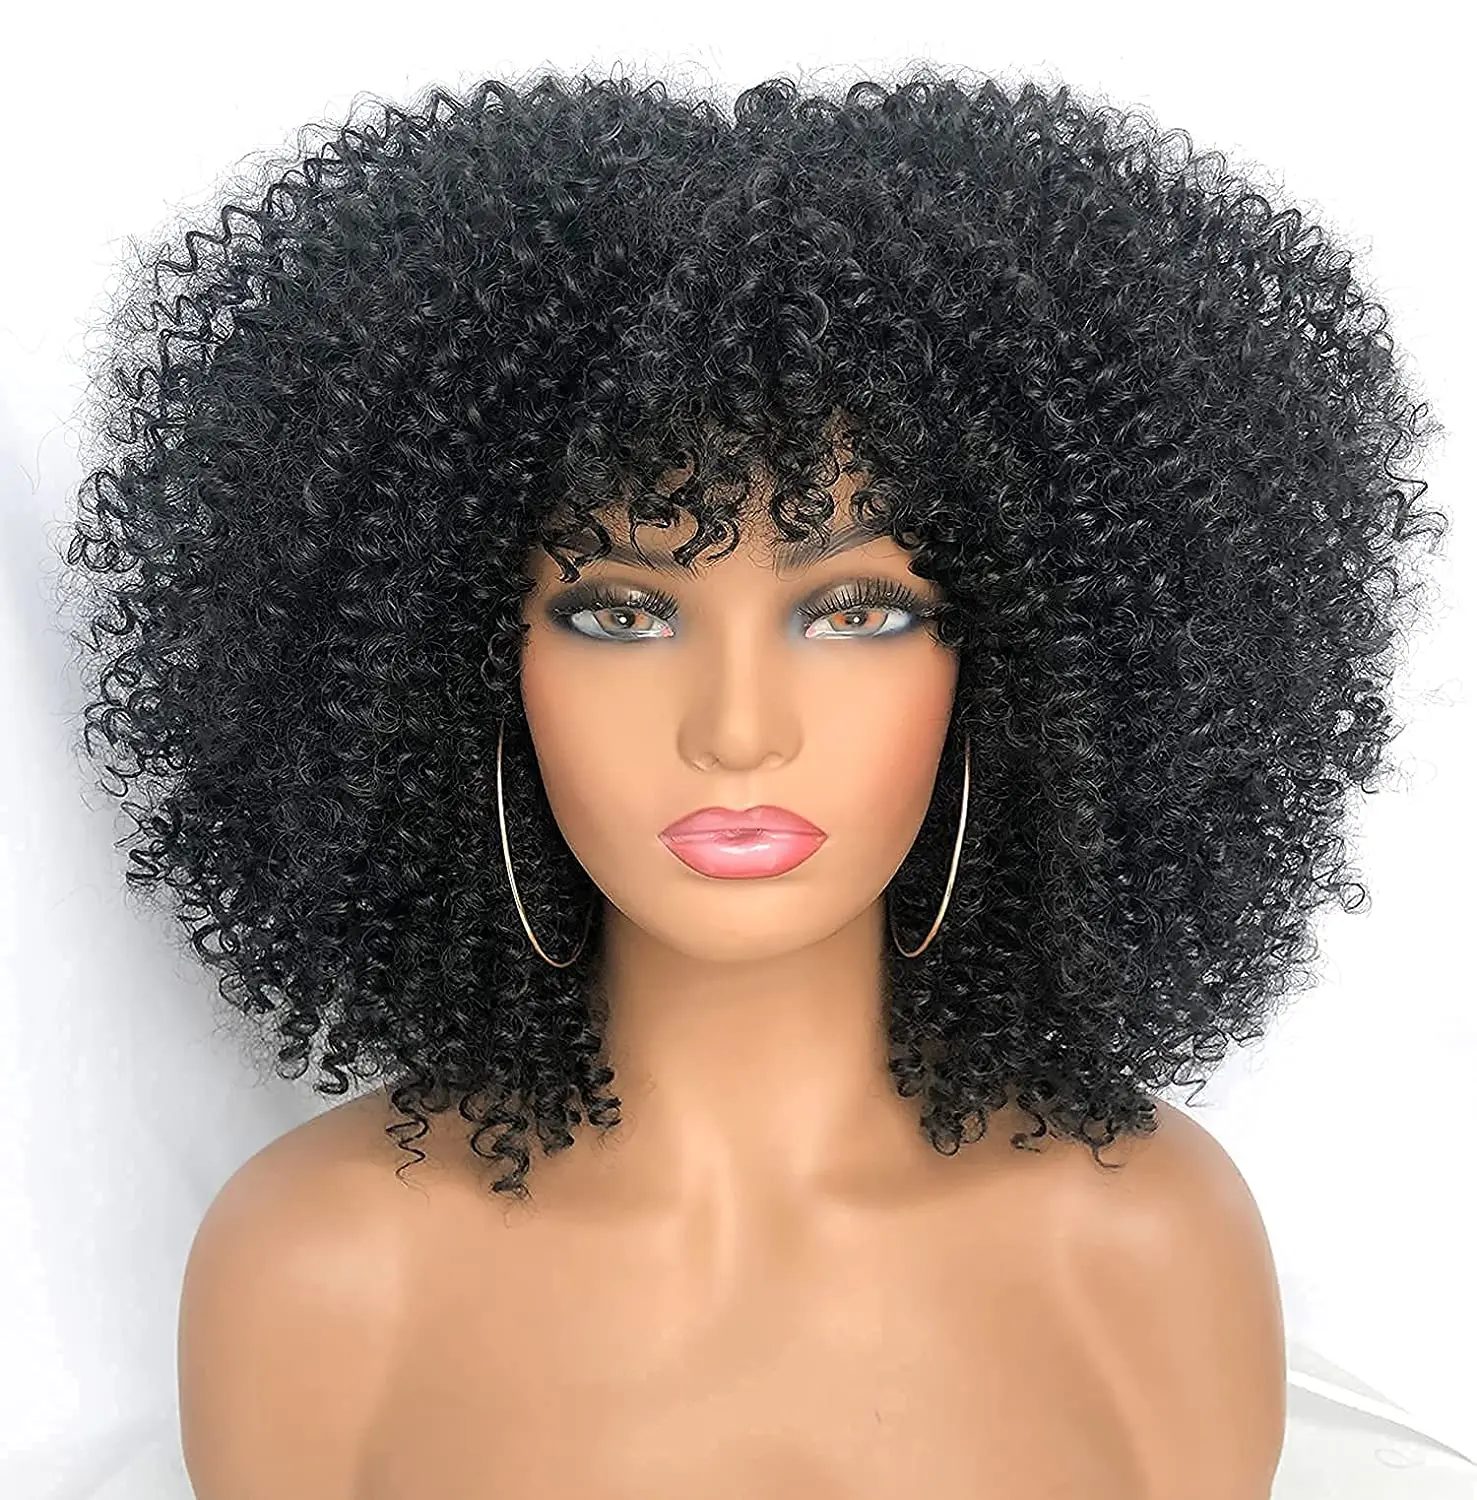 

Curly Wigs for Black Women Black Afro Bomb Curly Wig with Bangs Synthetic Fiber Glueless Long Kinky Curly Hair